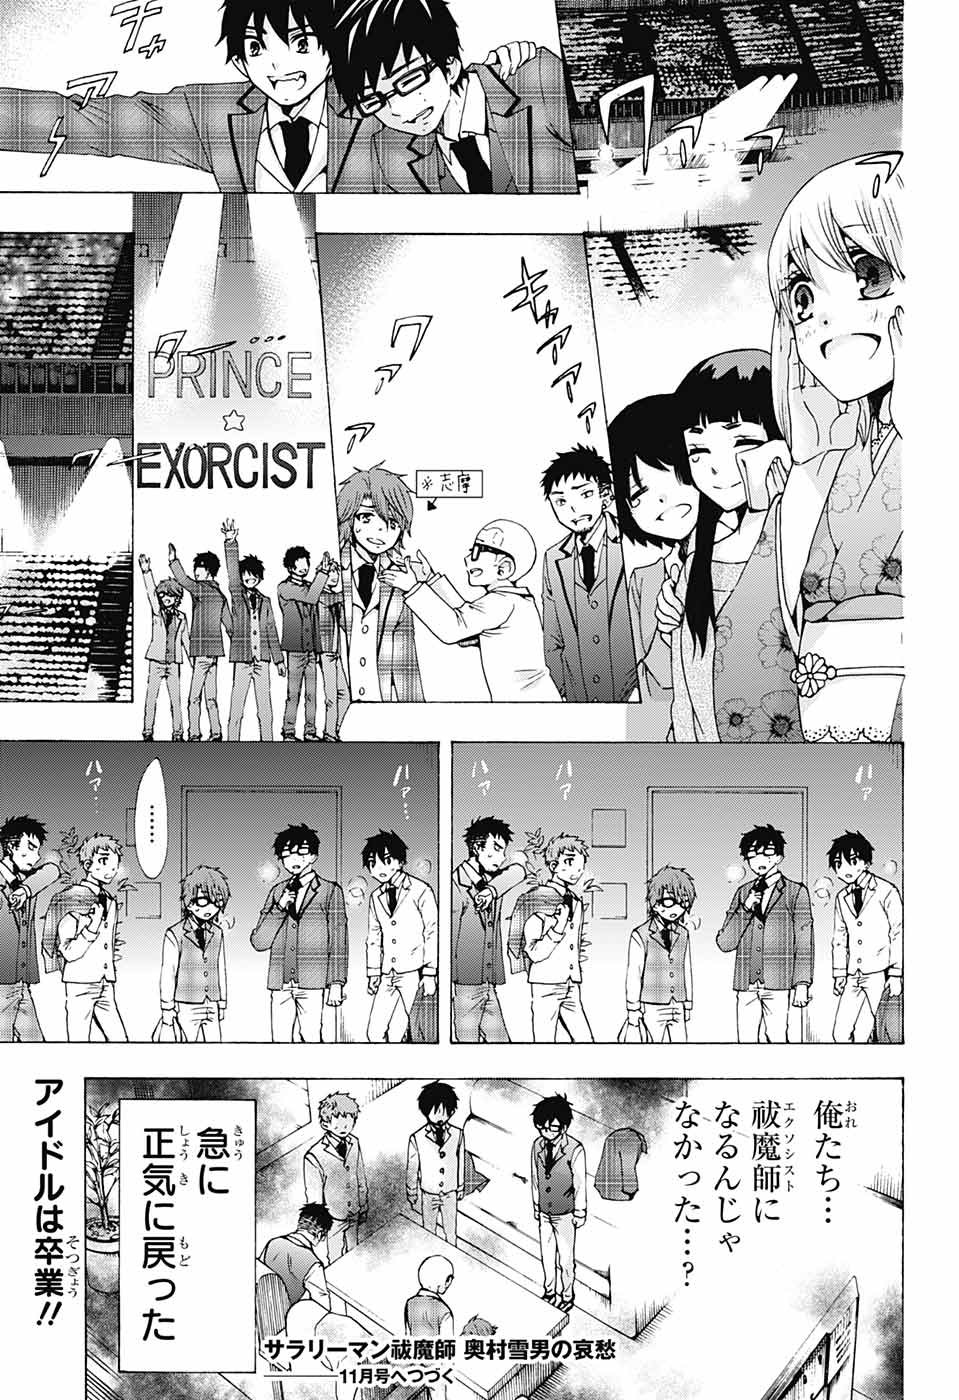 Ao no Exorcist - Chapter 114 - Page 39